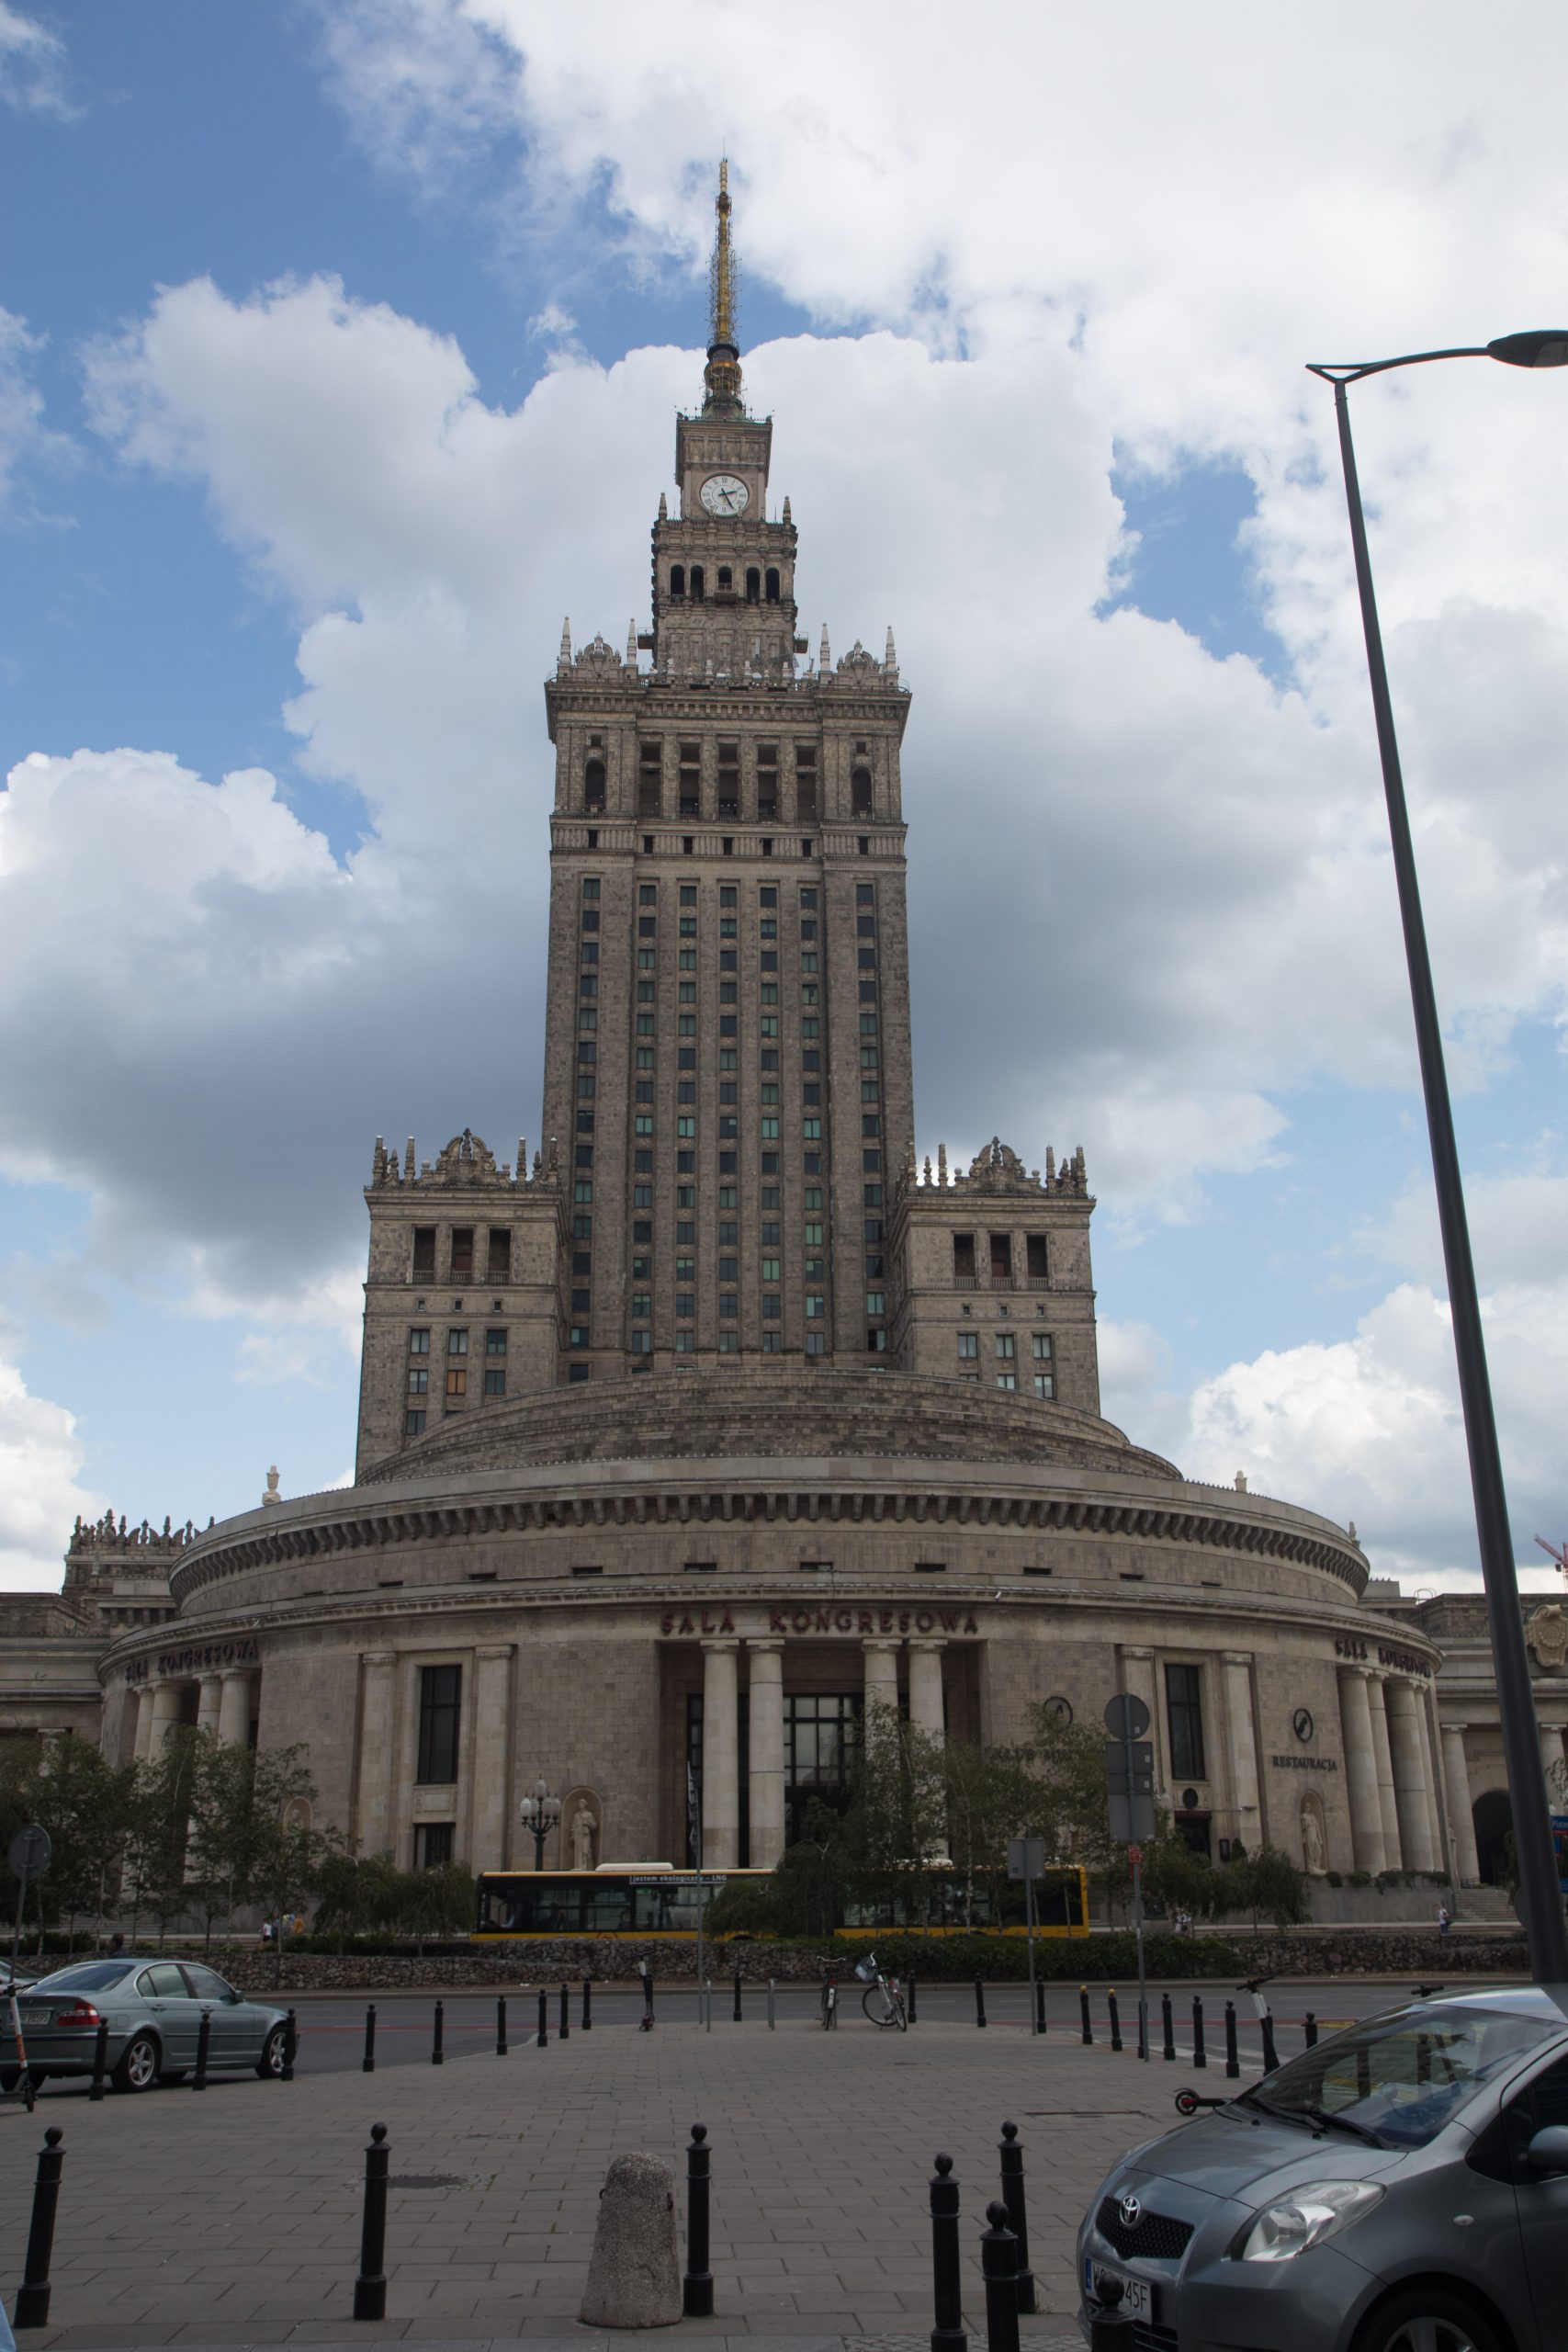 Palace of Culture and Science - aka the ugly sister. The tallest building in Warsaw.